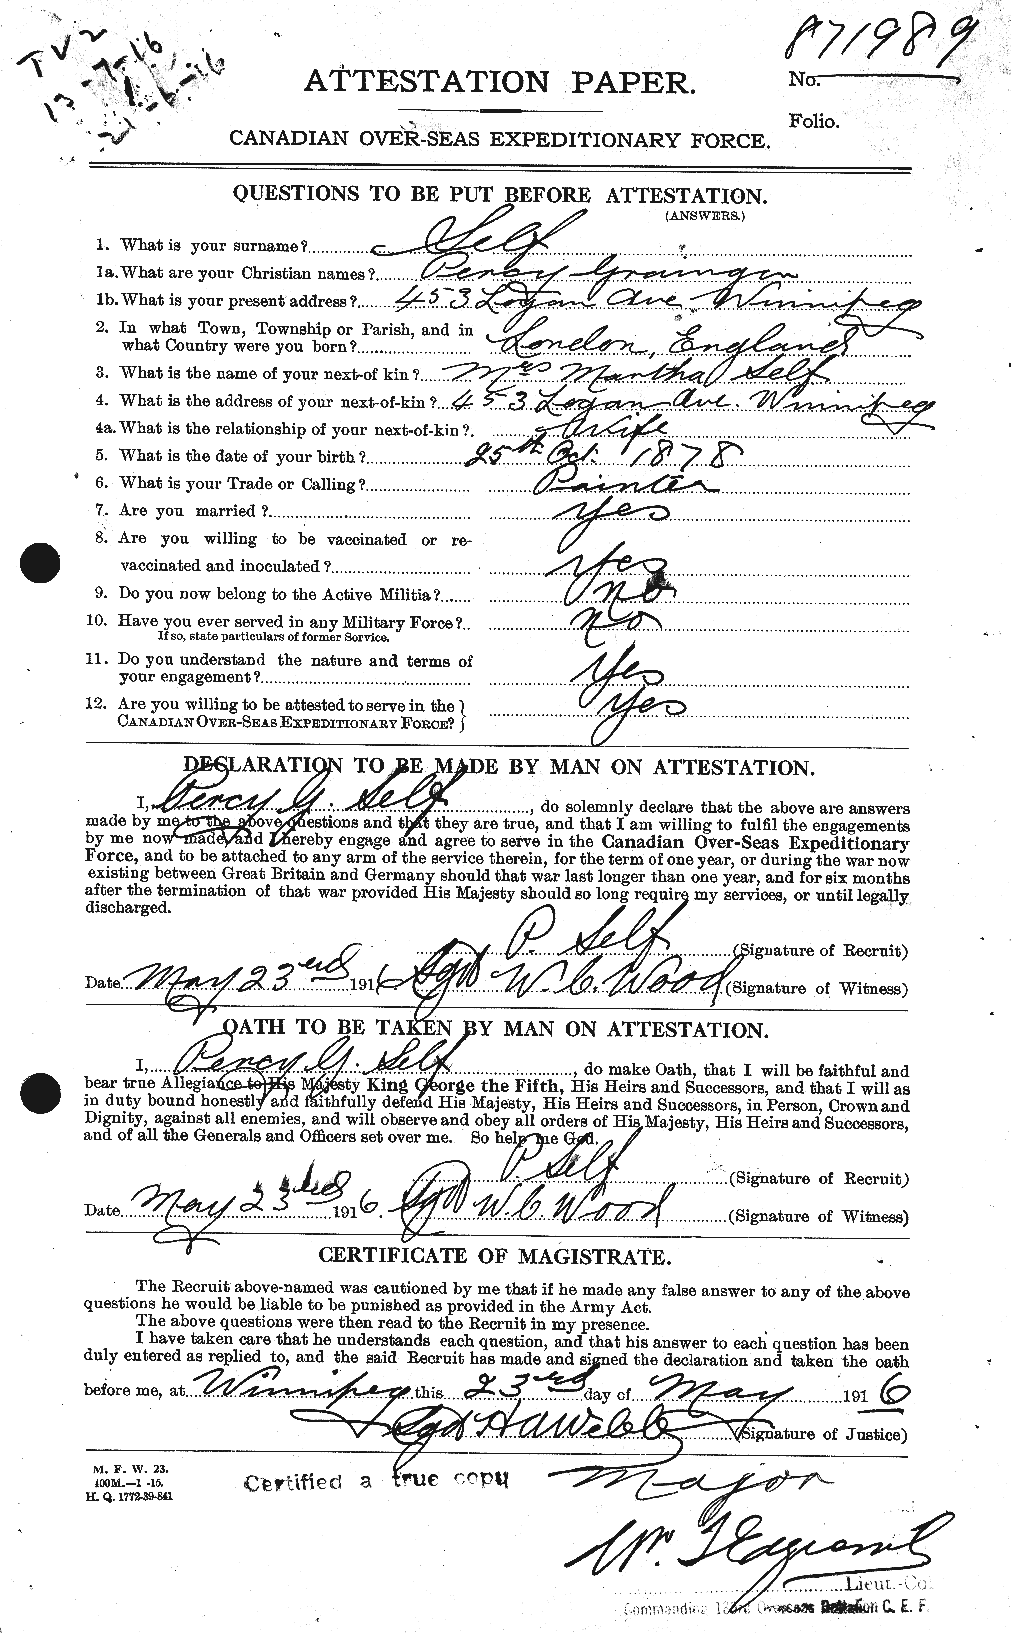 Personnel Records of the First World War - CEF 088378a